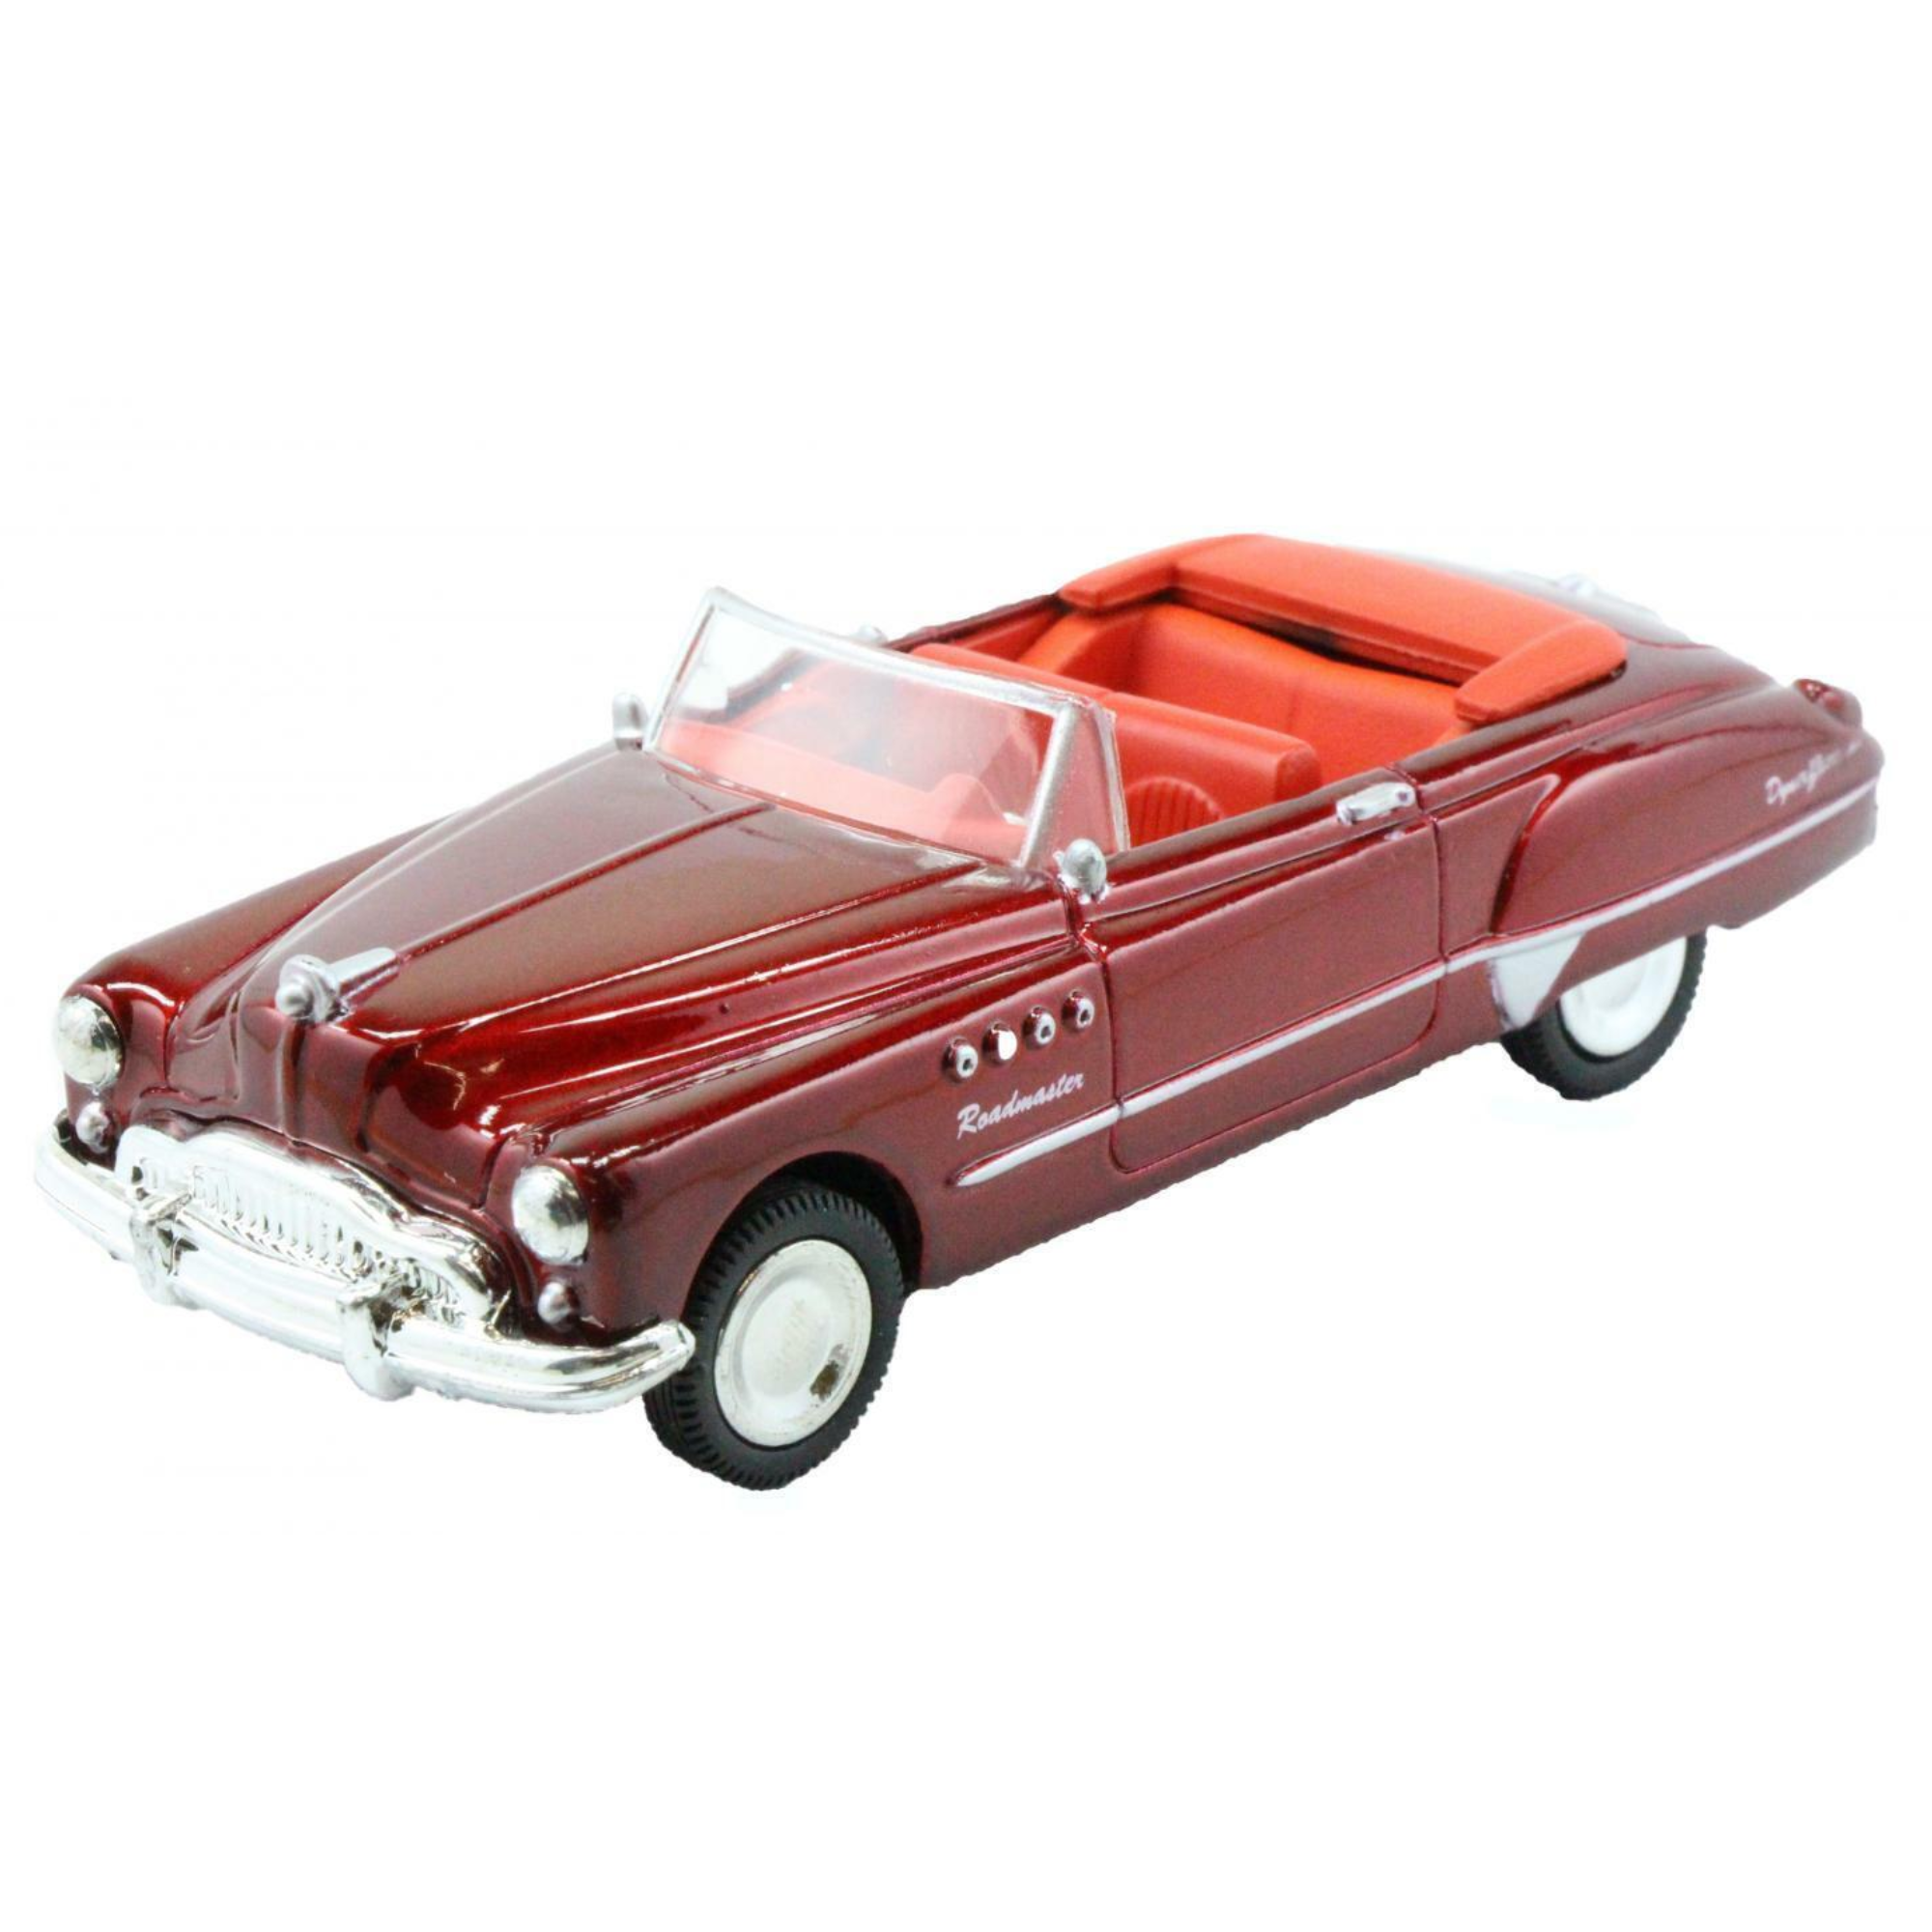 New Ray 1:43 Diecast Roadmaster Dynaflow Cabriolet 1949 Red - All American City Cruiser Collection - Toptoys2u